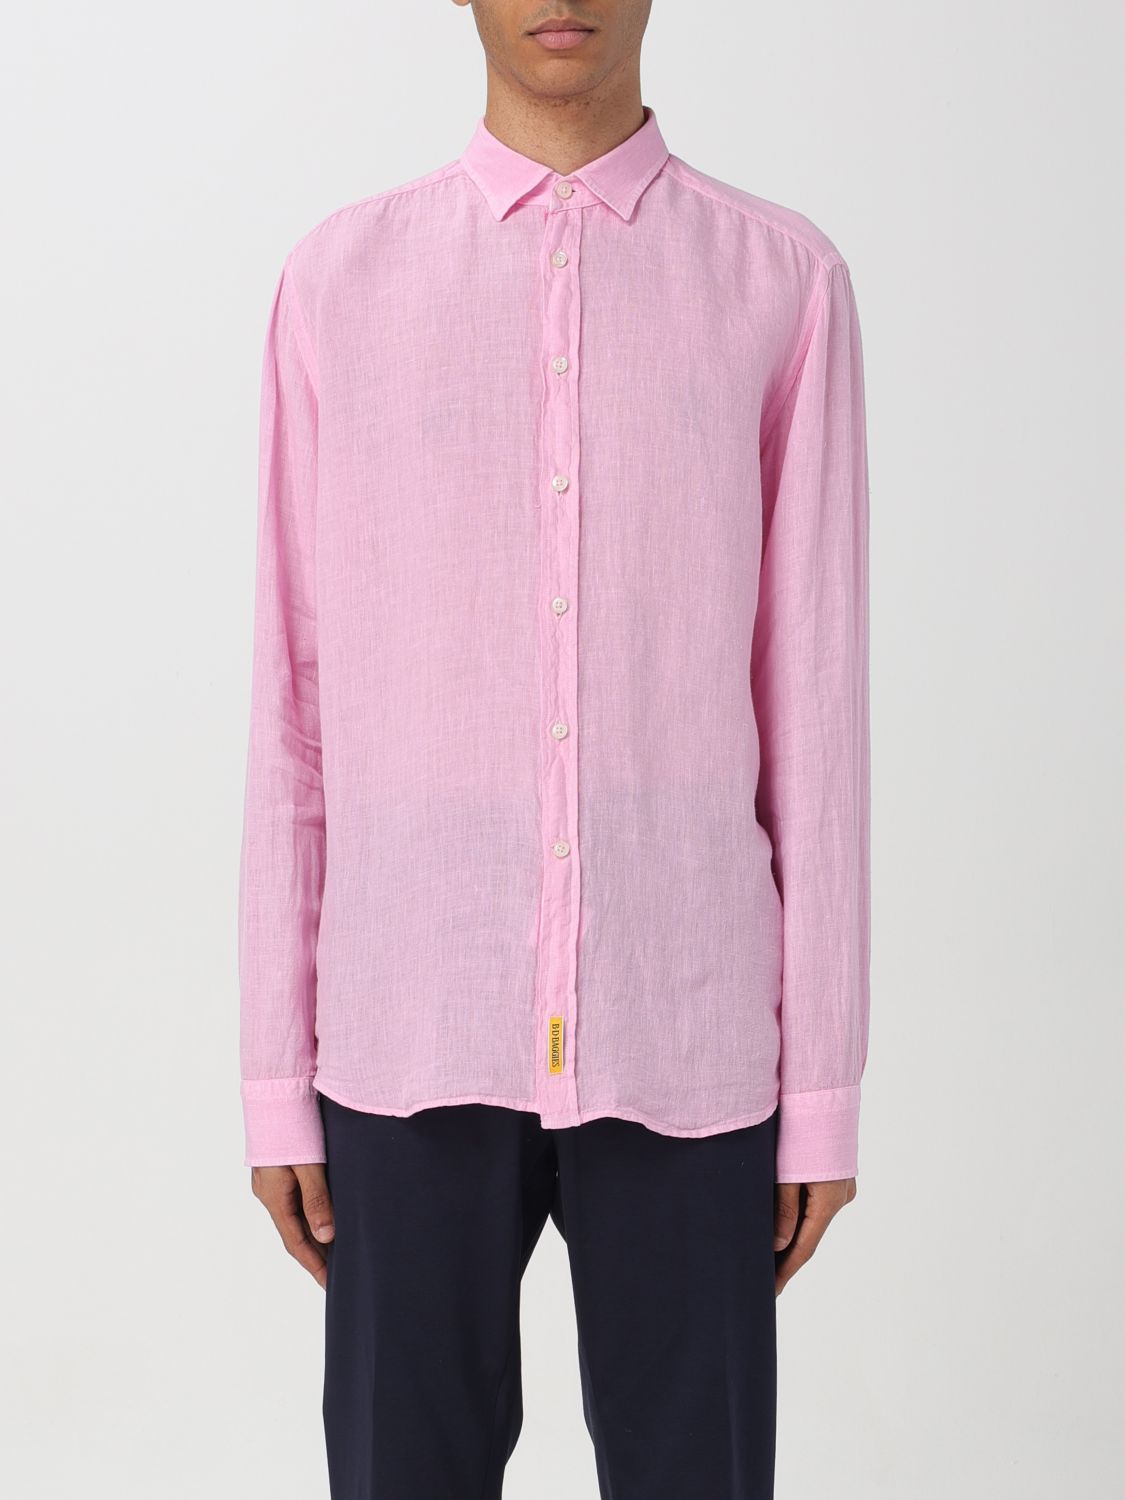 An American Tradition Shirt  Men Color Pink